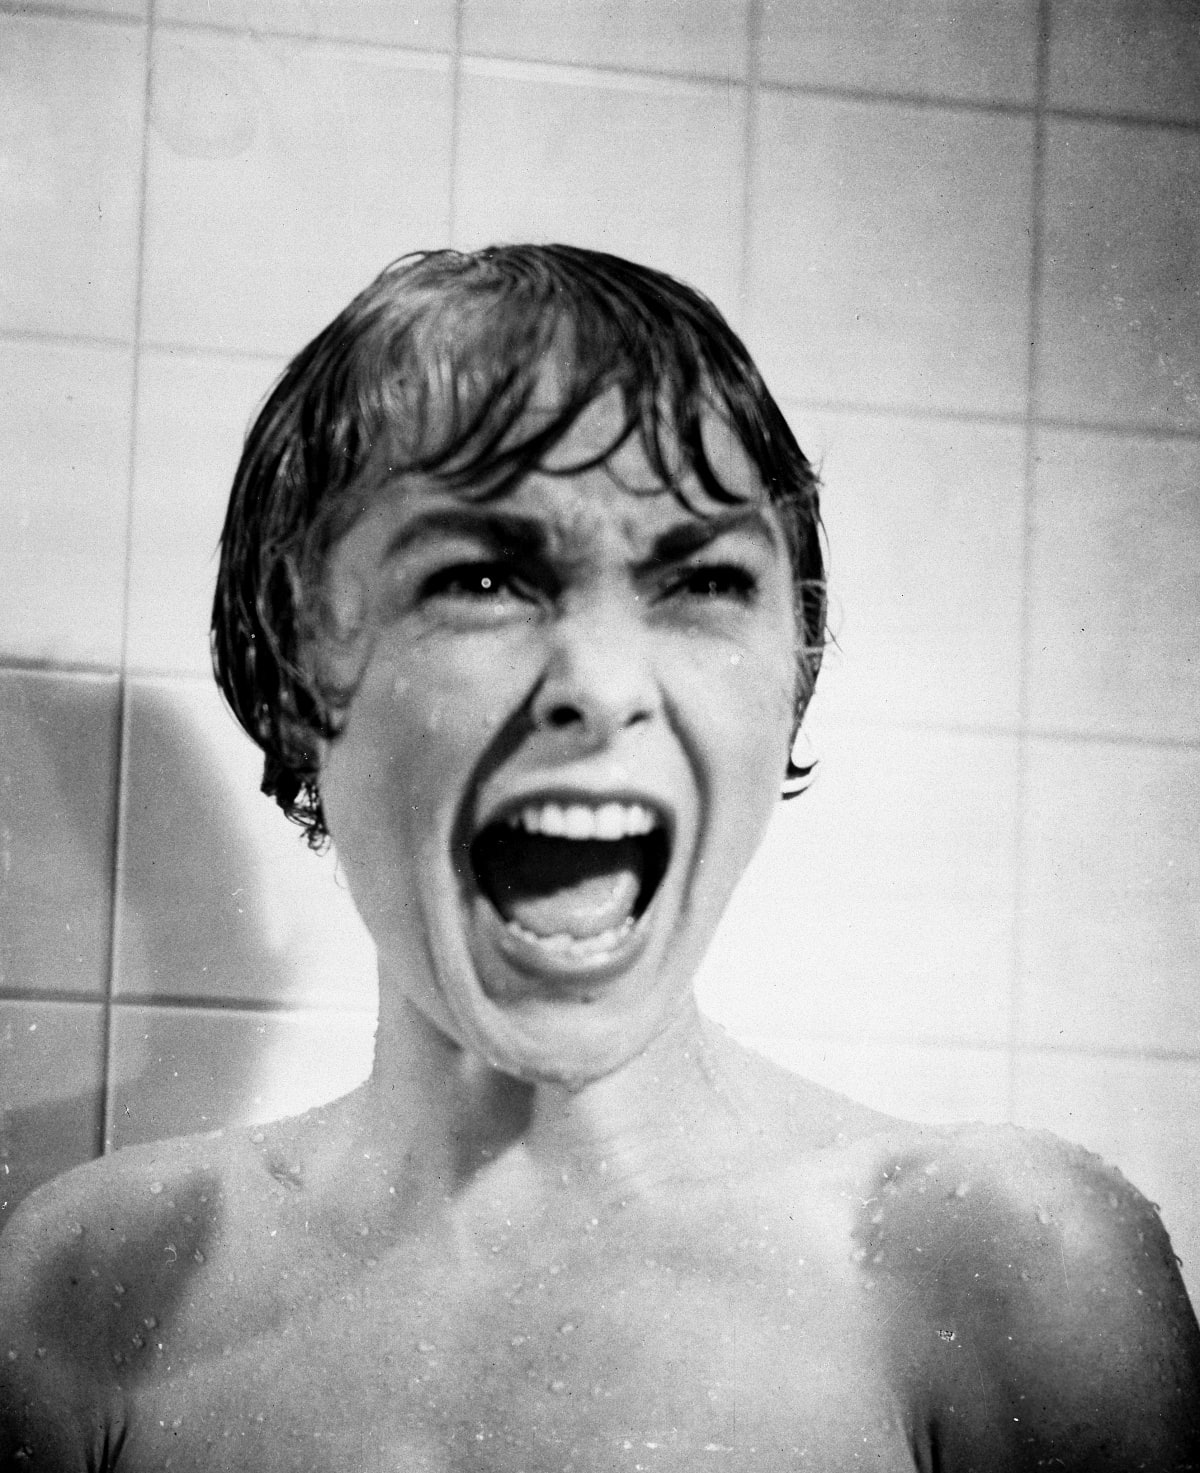 Janet Leigh as Marion Crane in the 1960 psychological horror thriller film Psycho